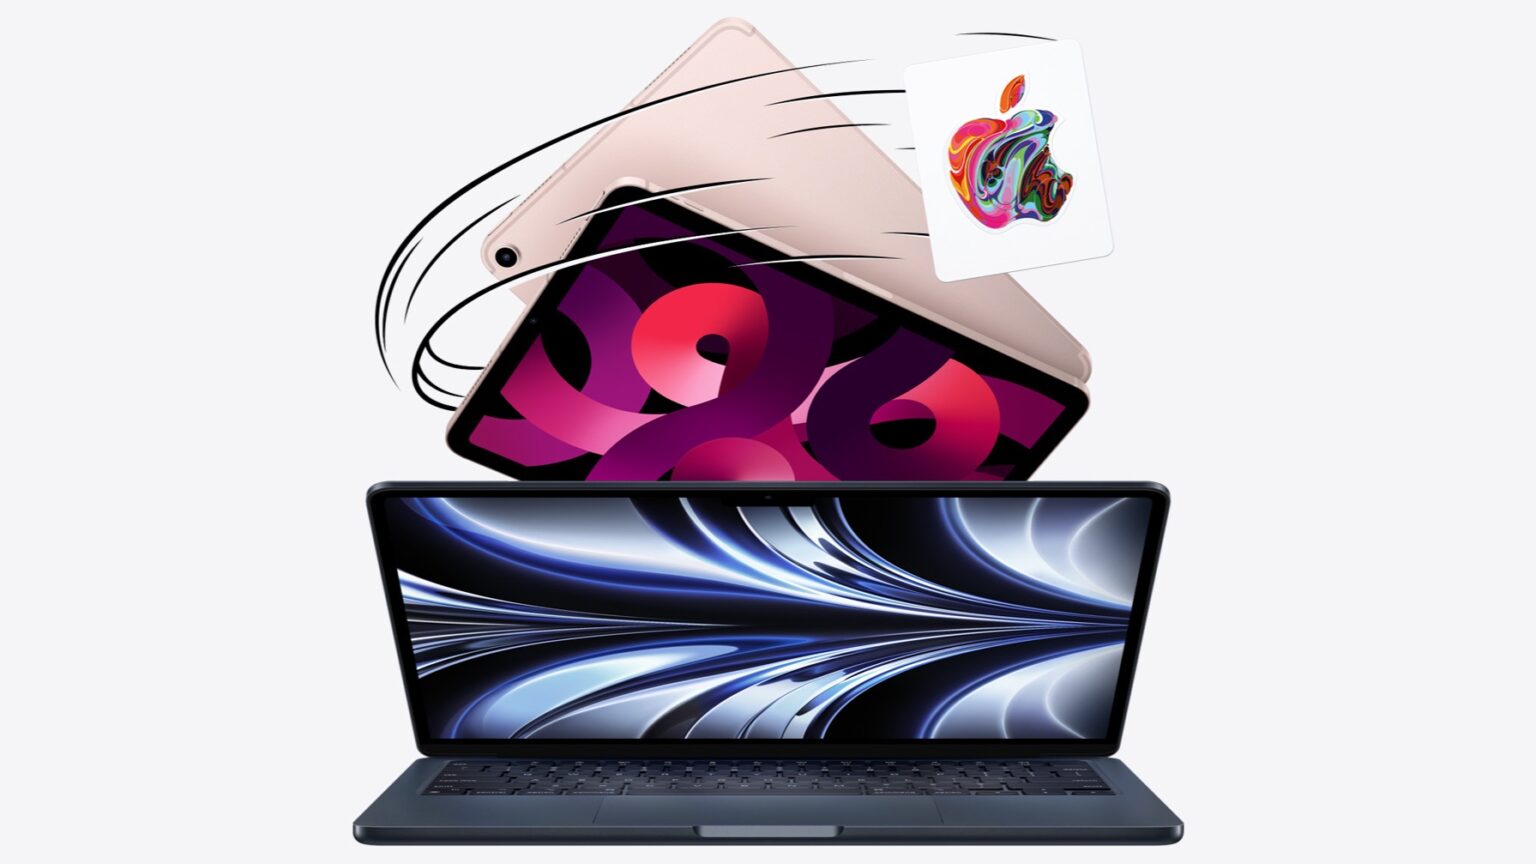 Get an Apple gift card when you purchase an eligible Mac or iPad.